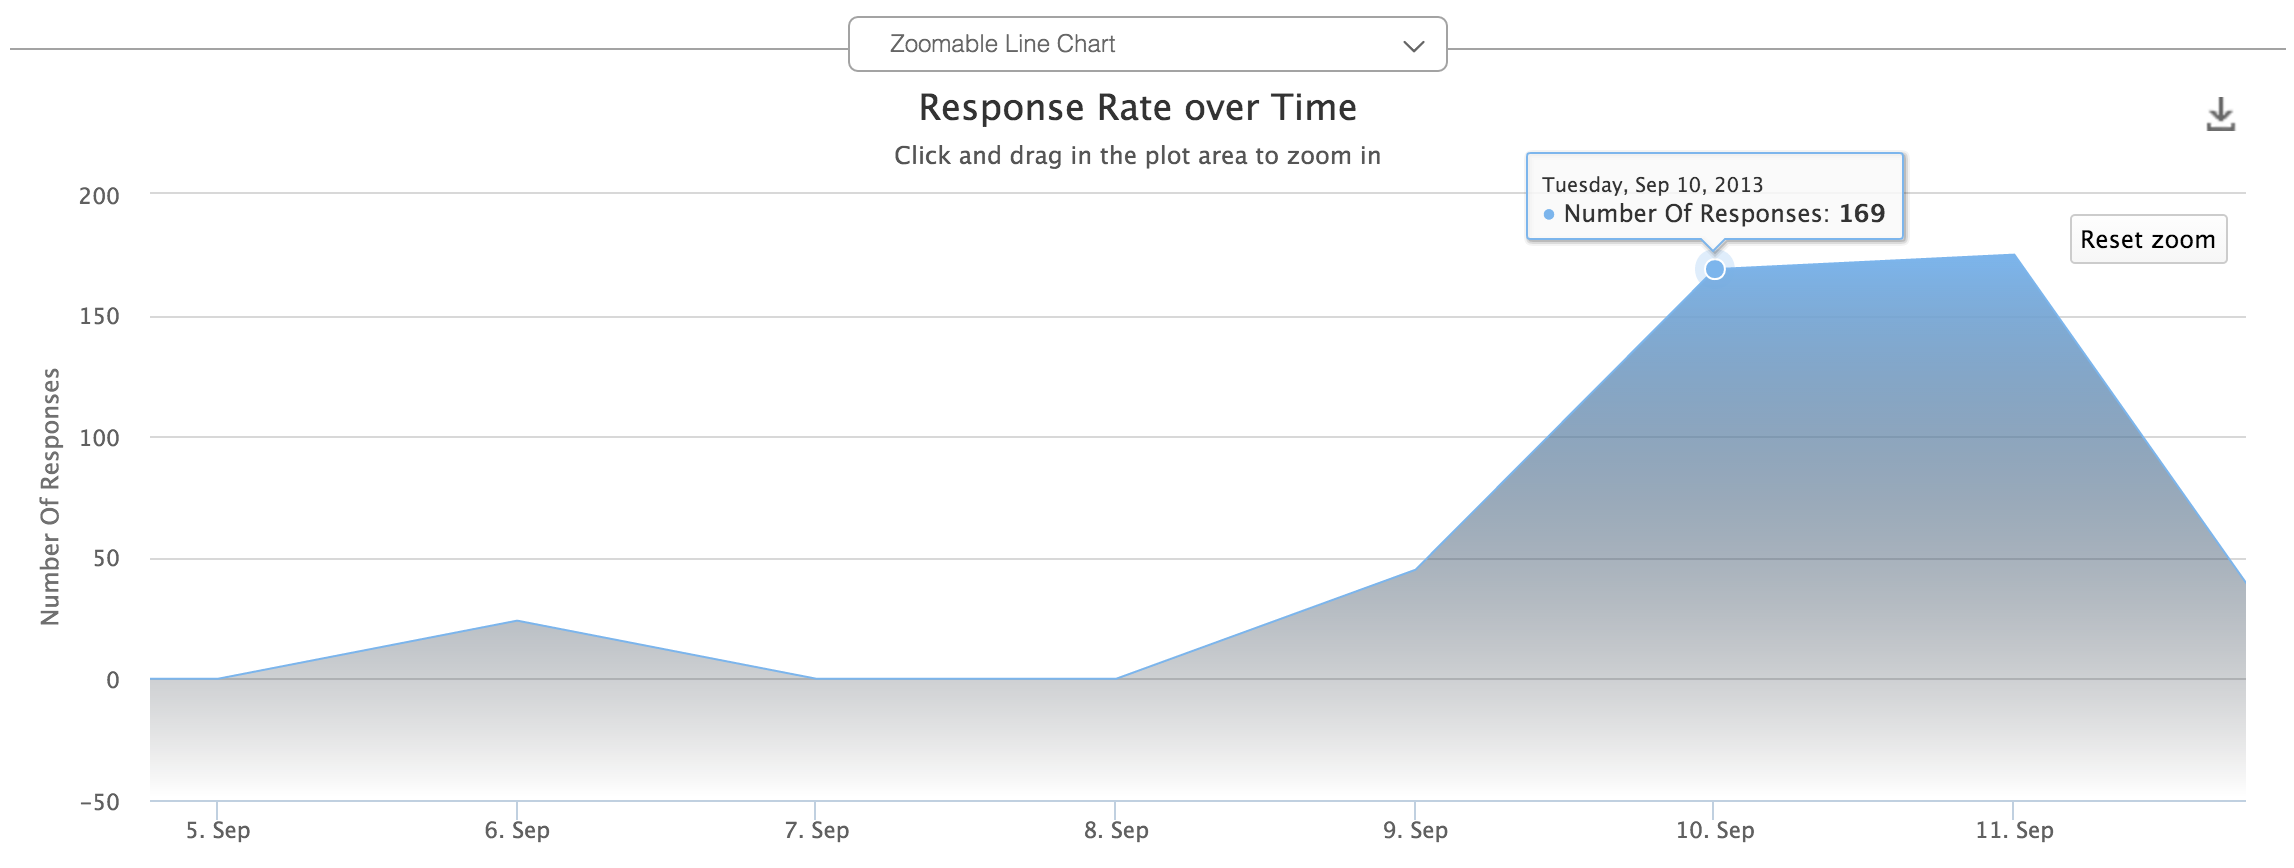 response_rate_over_time.png